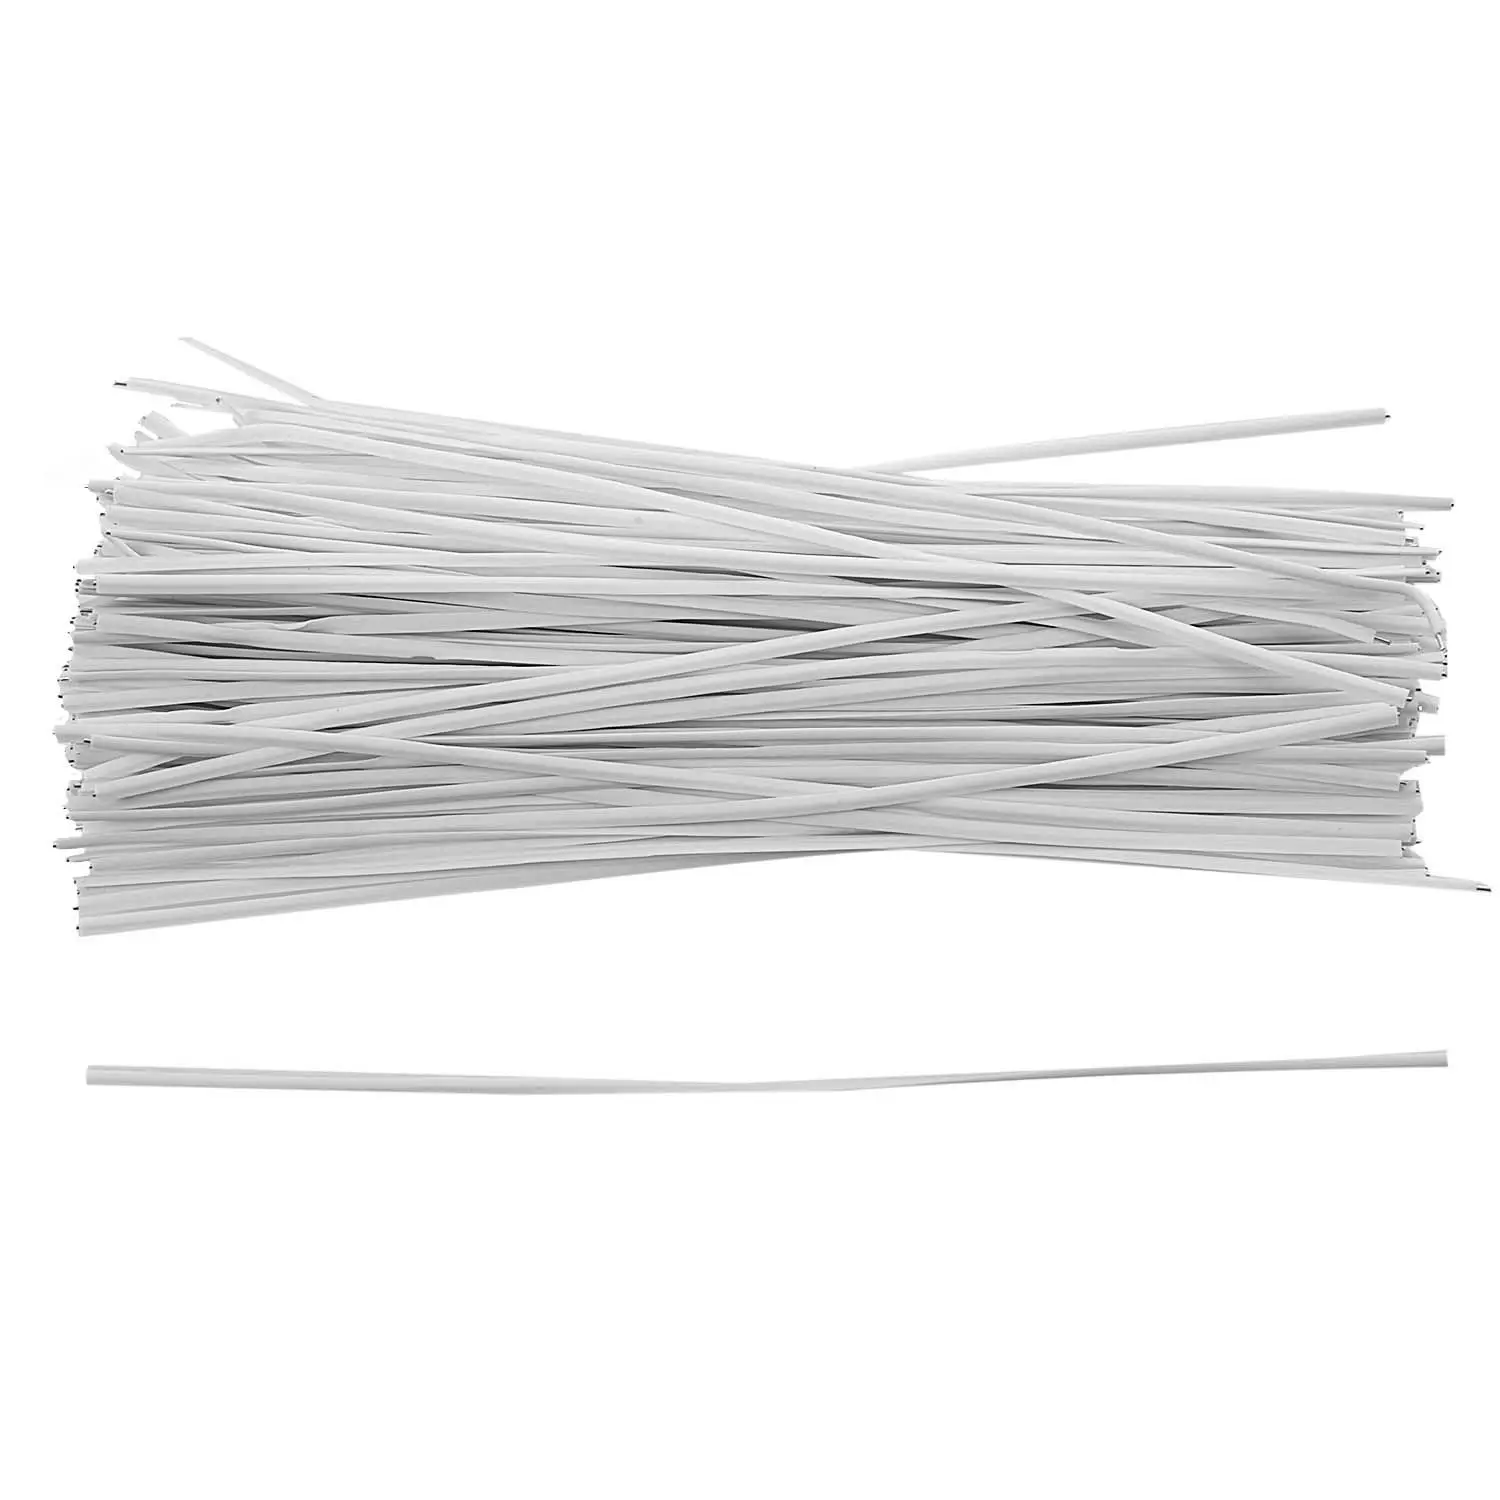 

130pcs Cable Organizer Binding Packaging Wire Twist Ties White 150x2.2mm Dropshipping